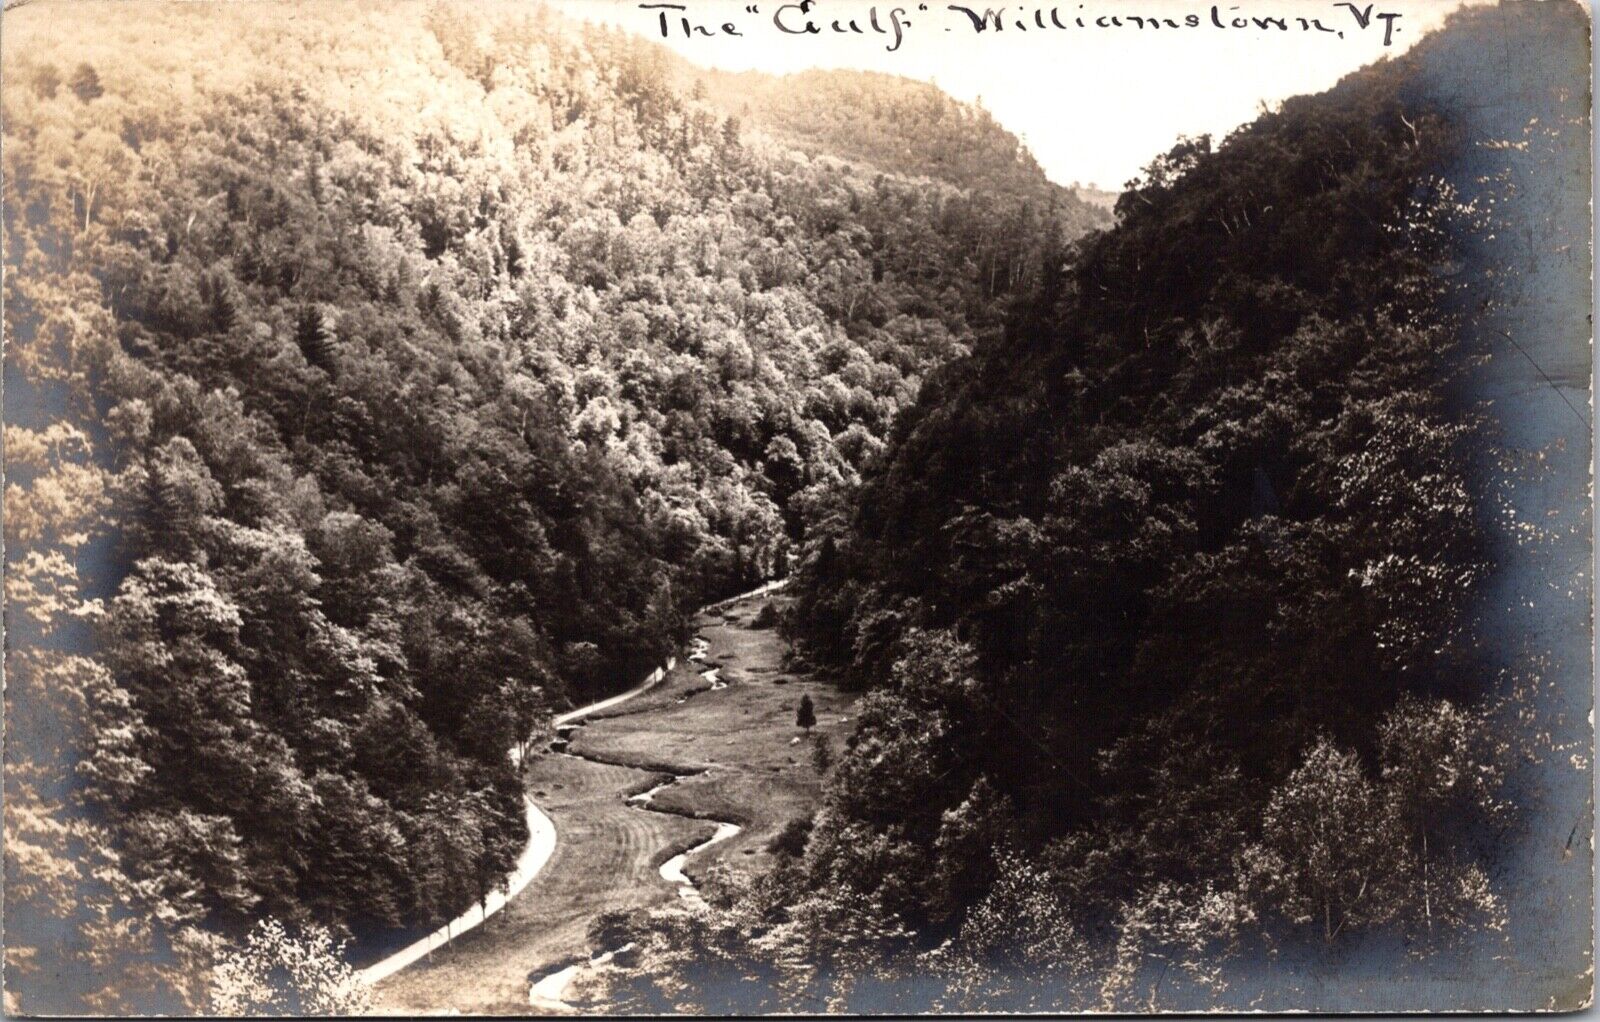 Real Photo Postcard The Gulf in Williamstown, Vermont